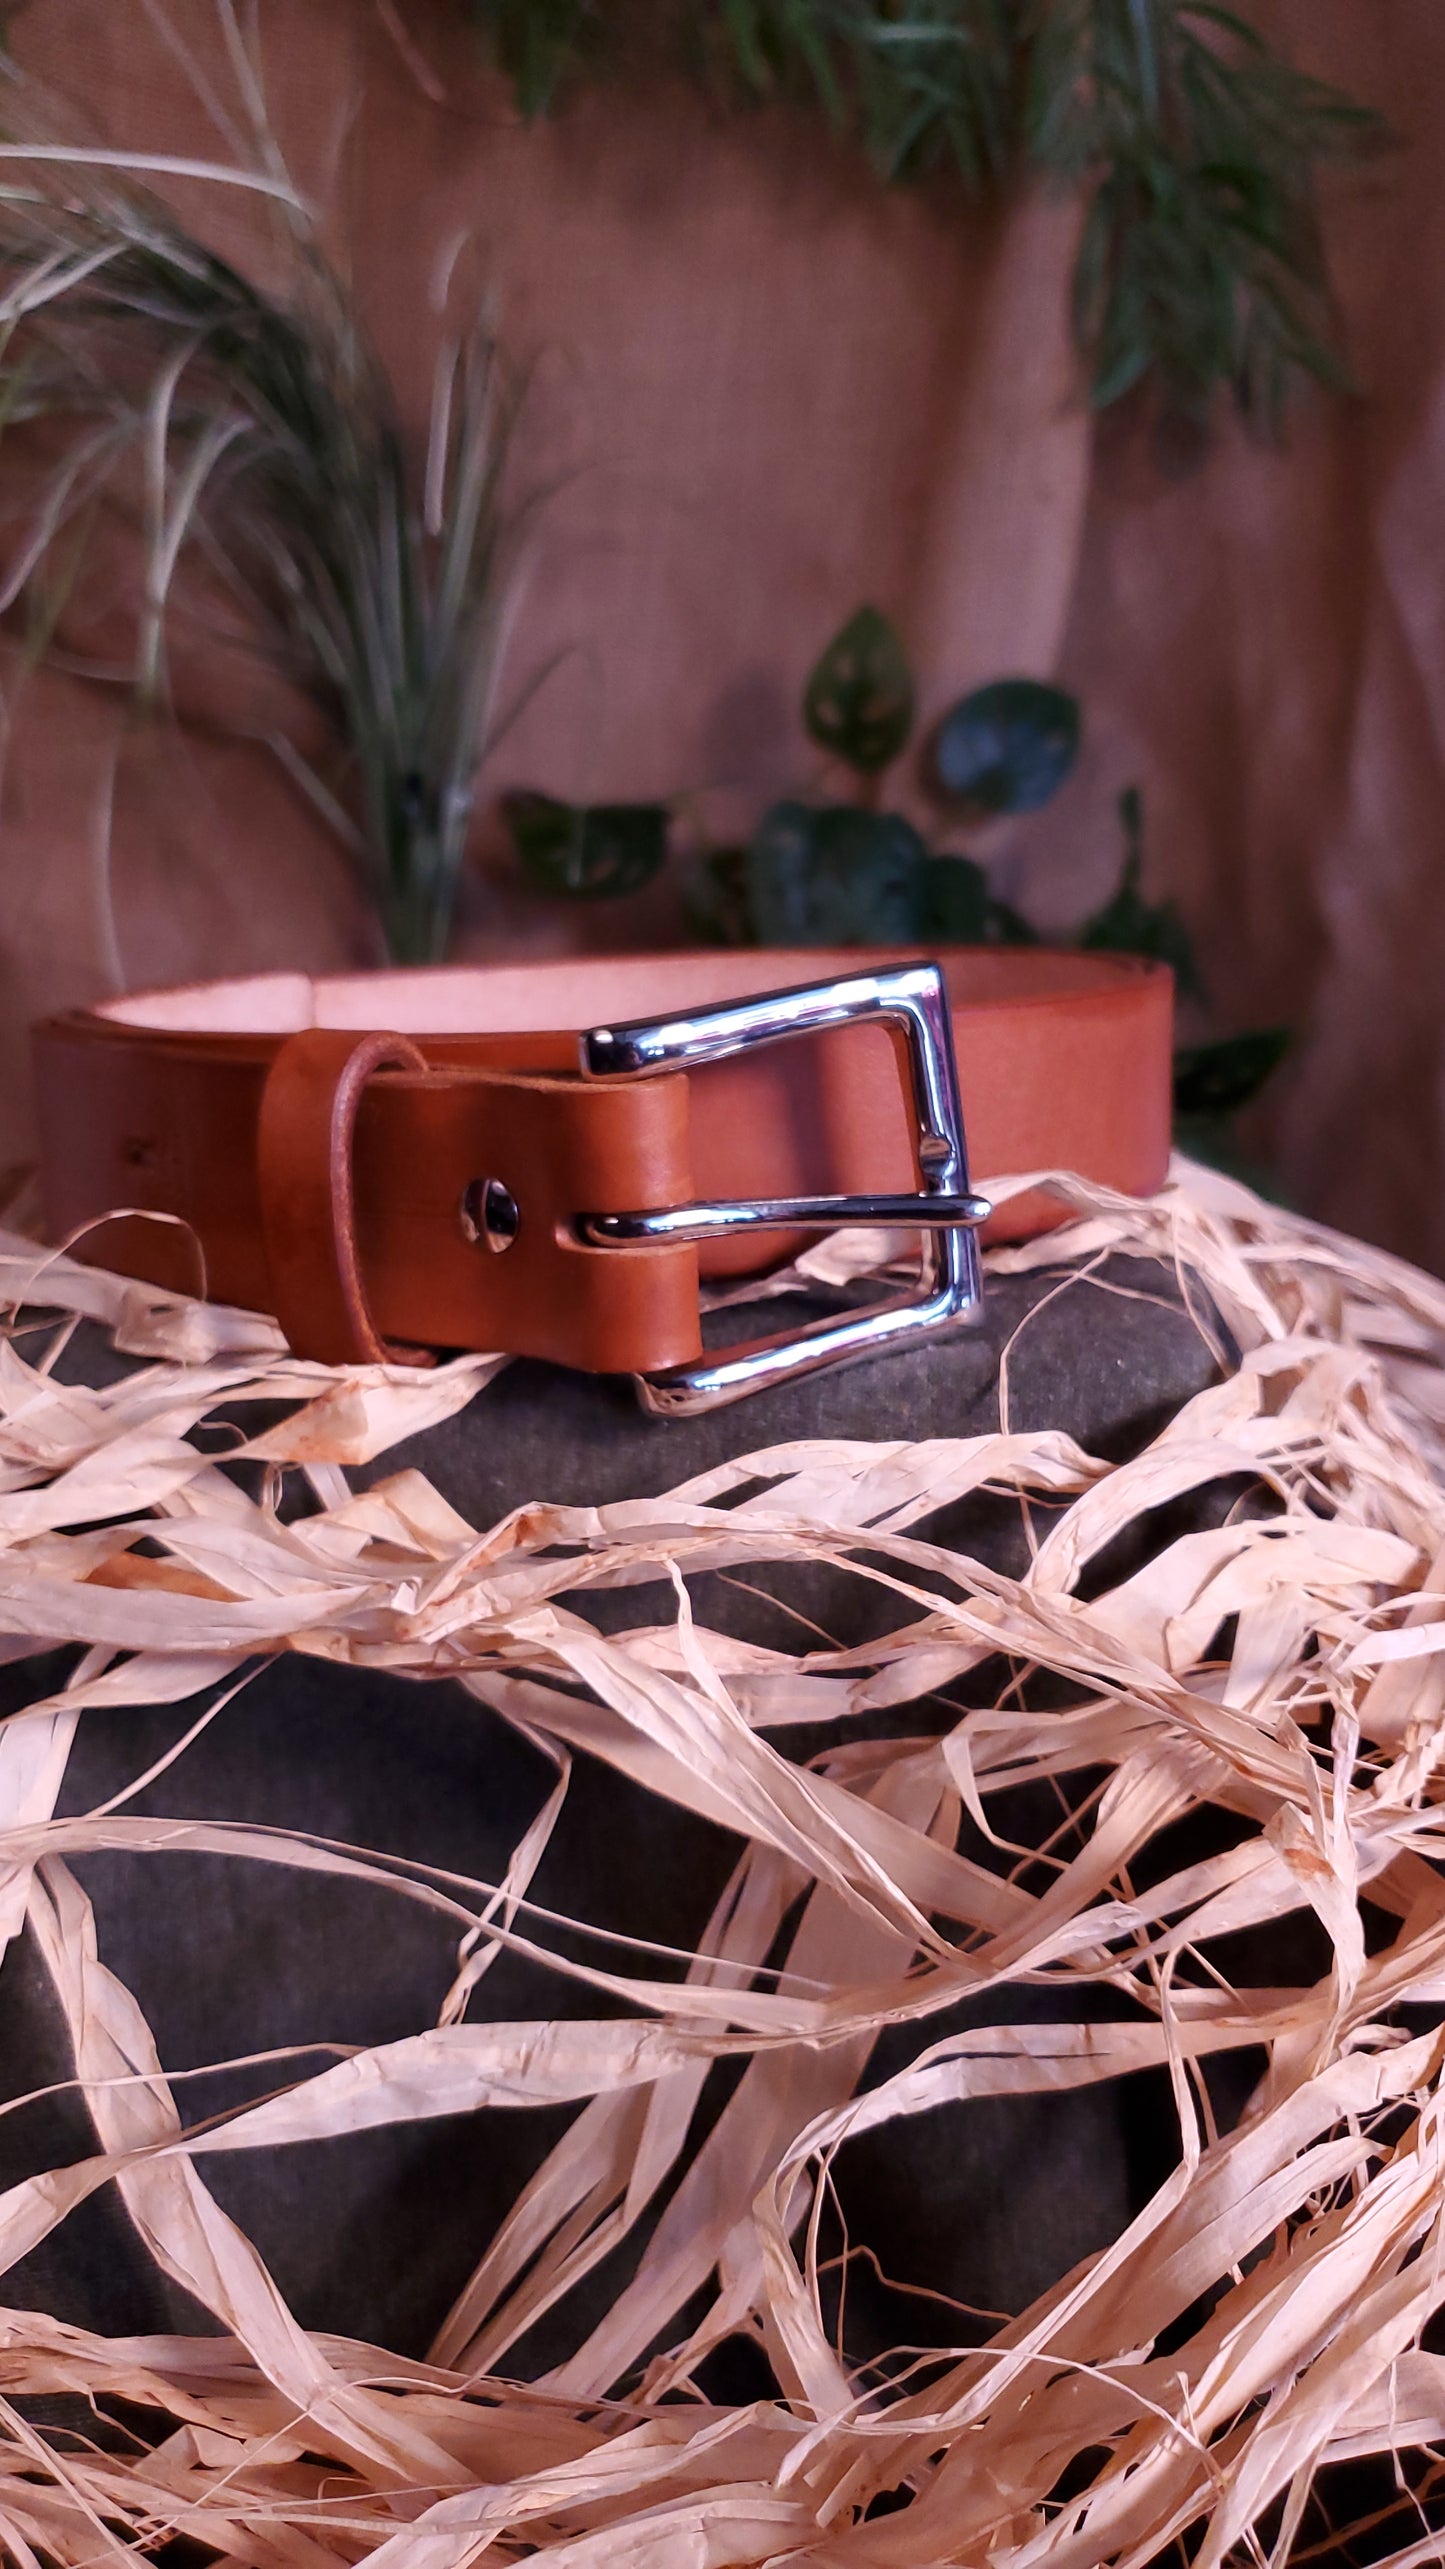 Brown colored belt with a nickel buckle and matching hardware.